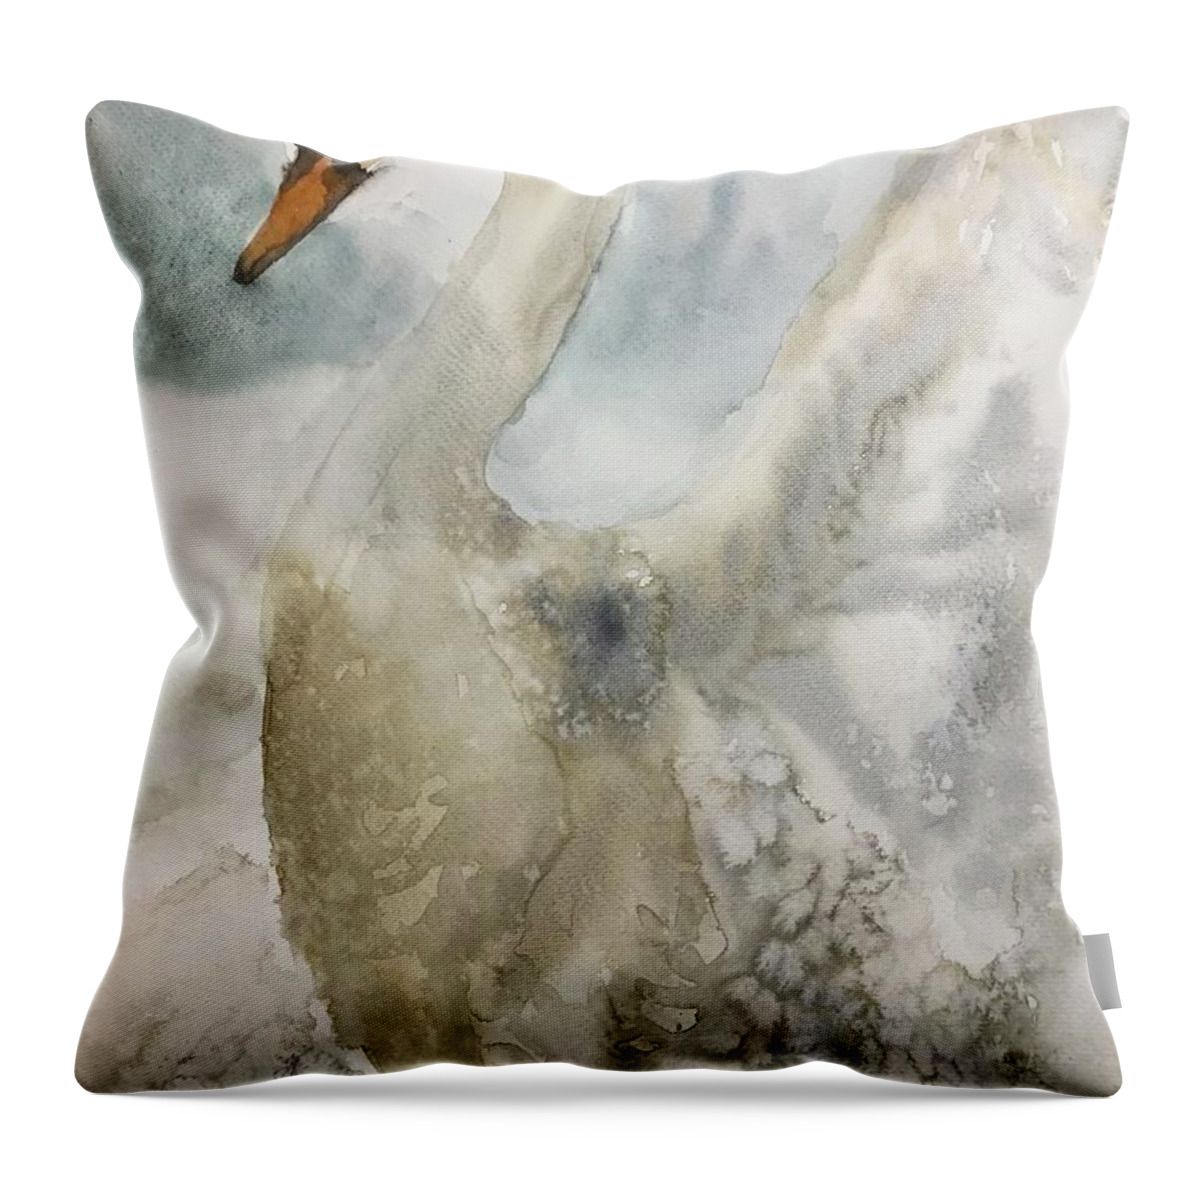 0322021 Throw Pillow featuring the painting 0322021 by Han in Huang wong